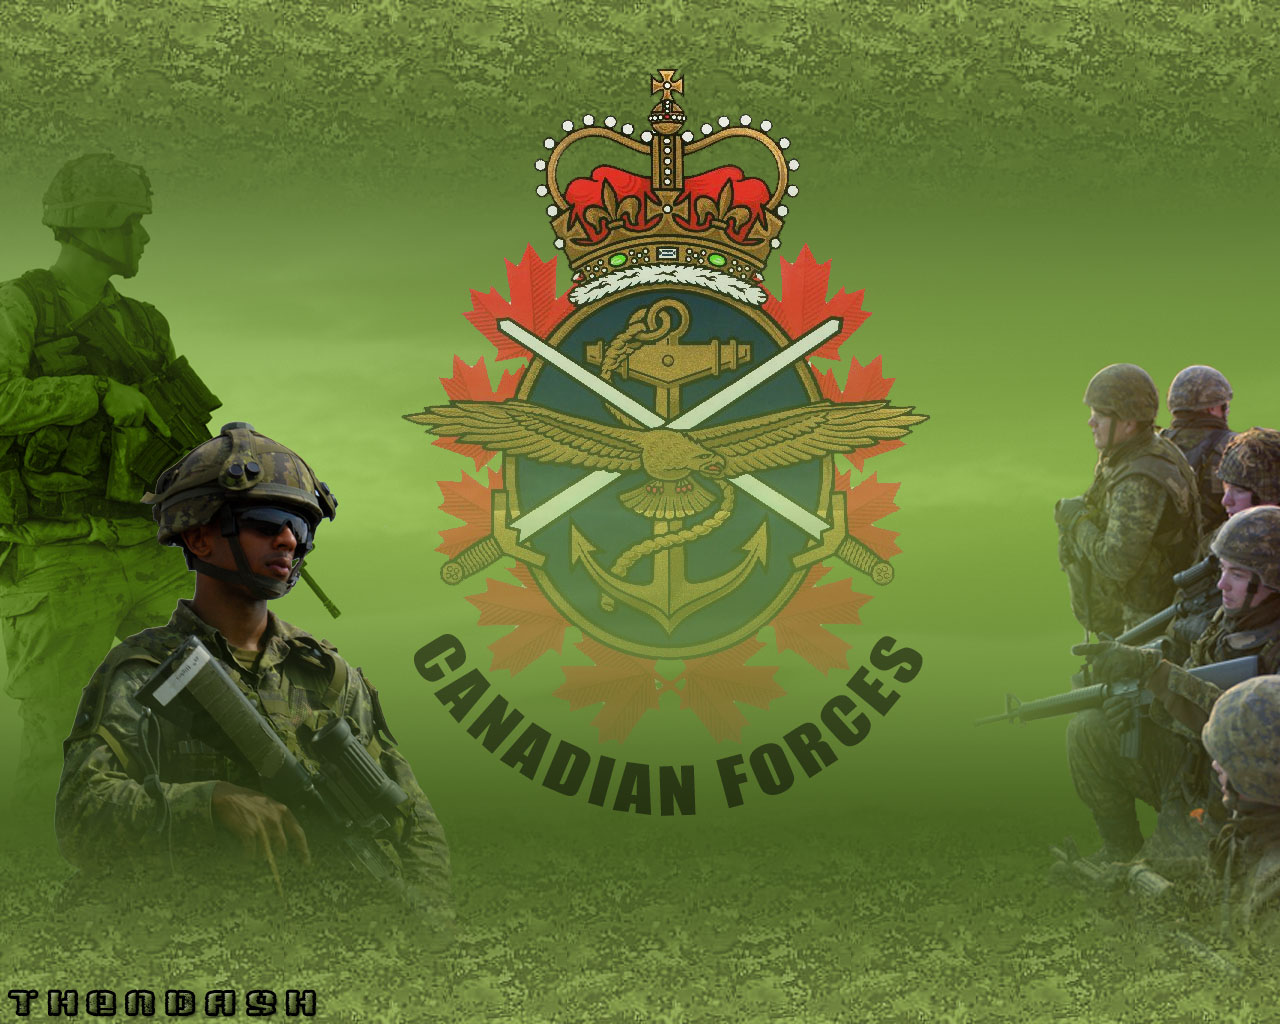 Canadian Forces Wallpaperwallpaper About Background Wallpaper